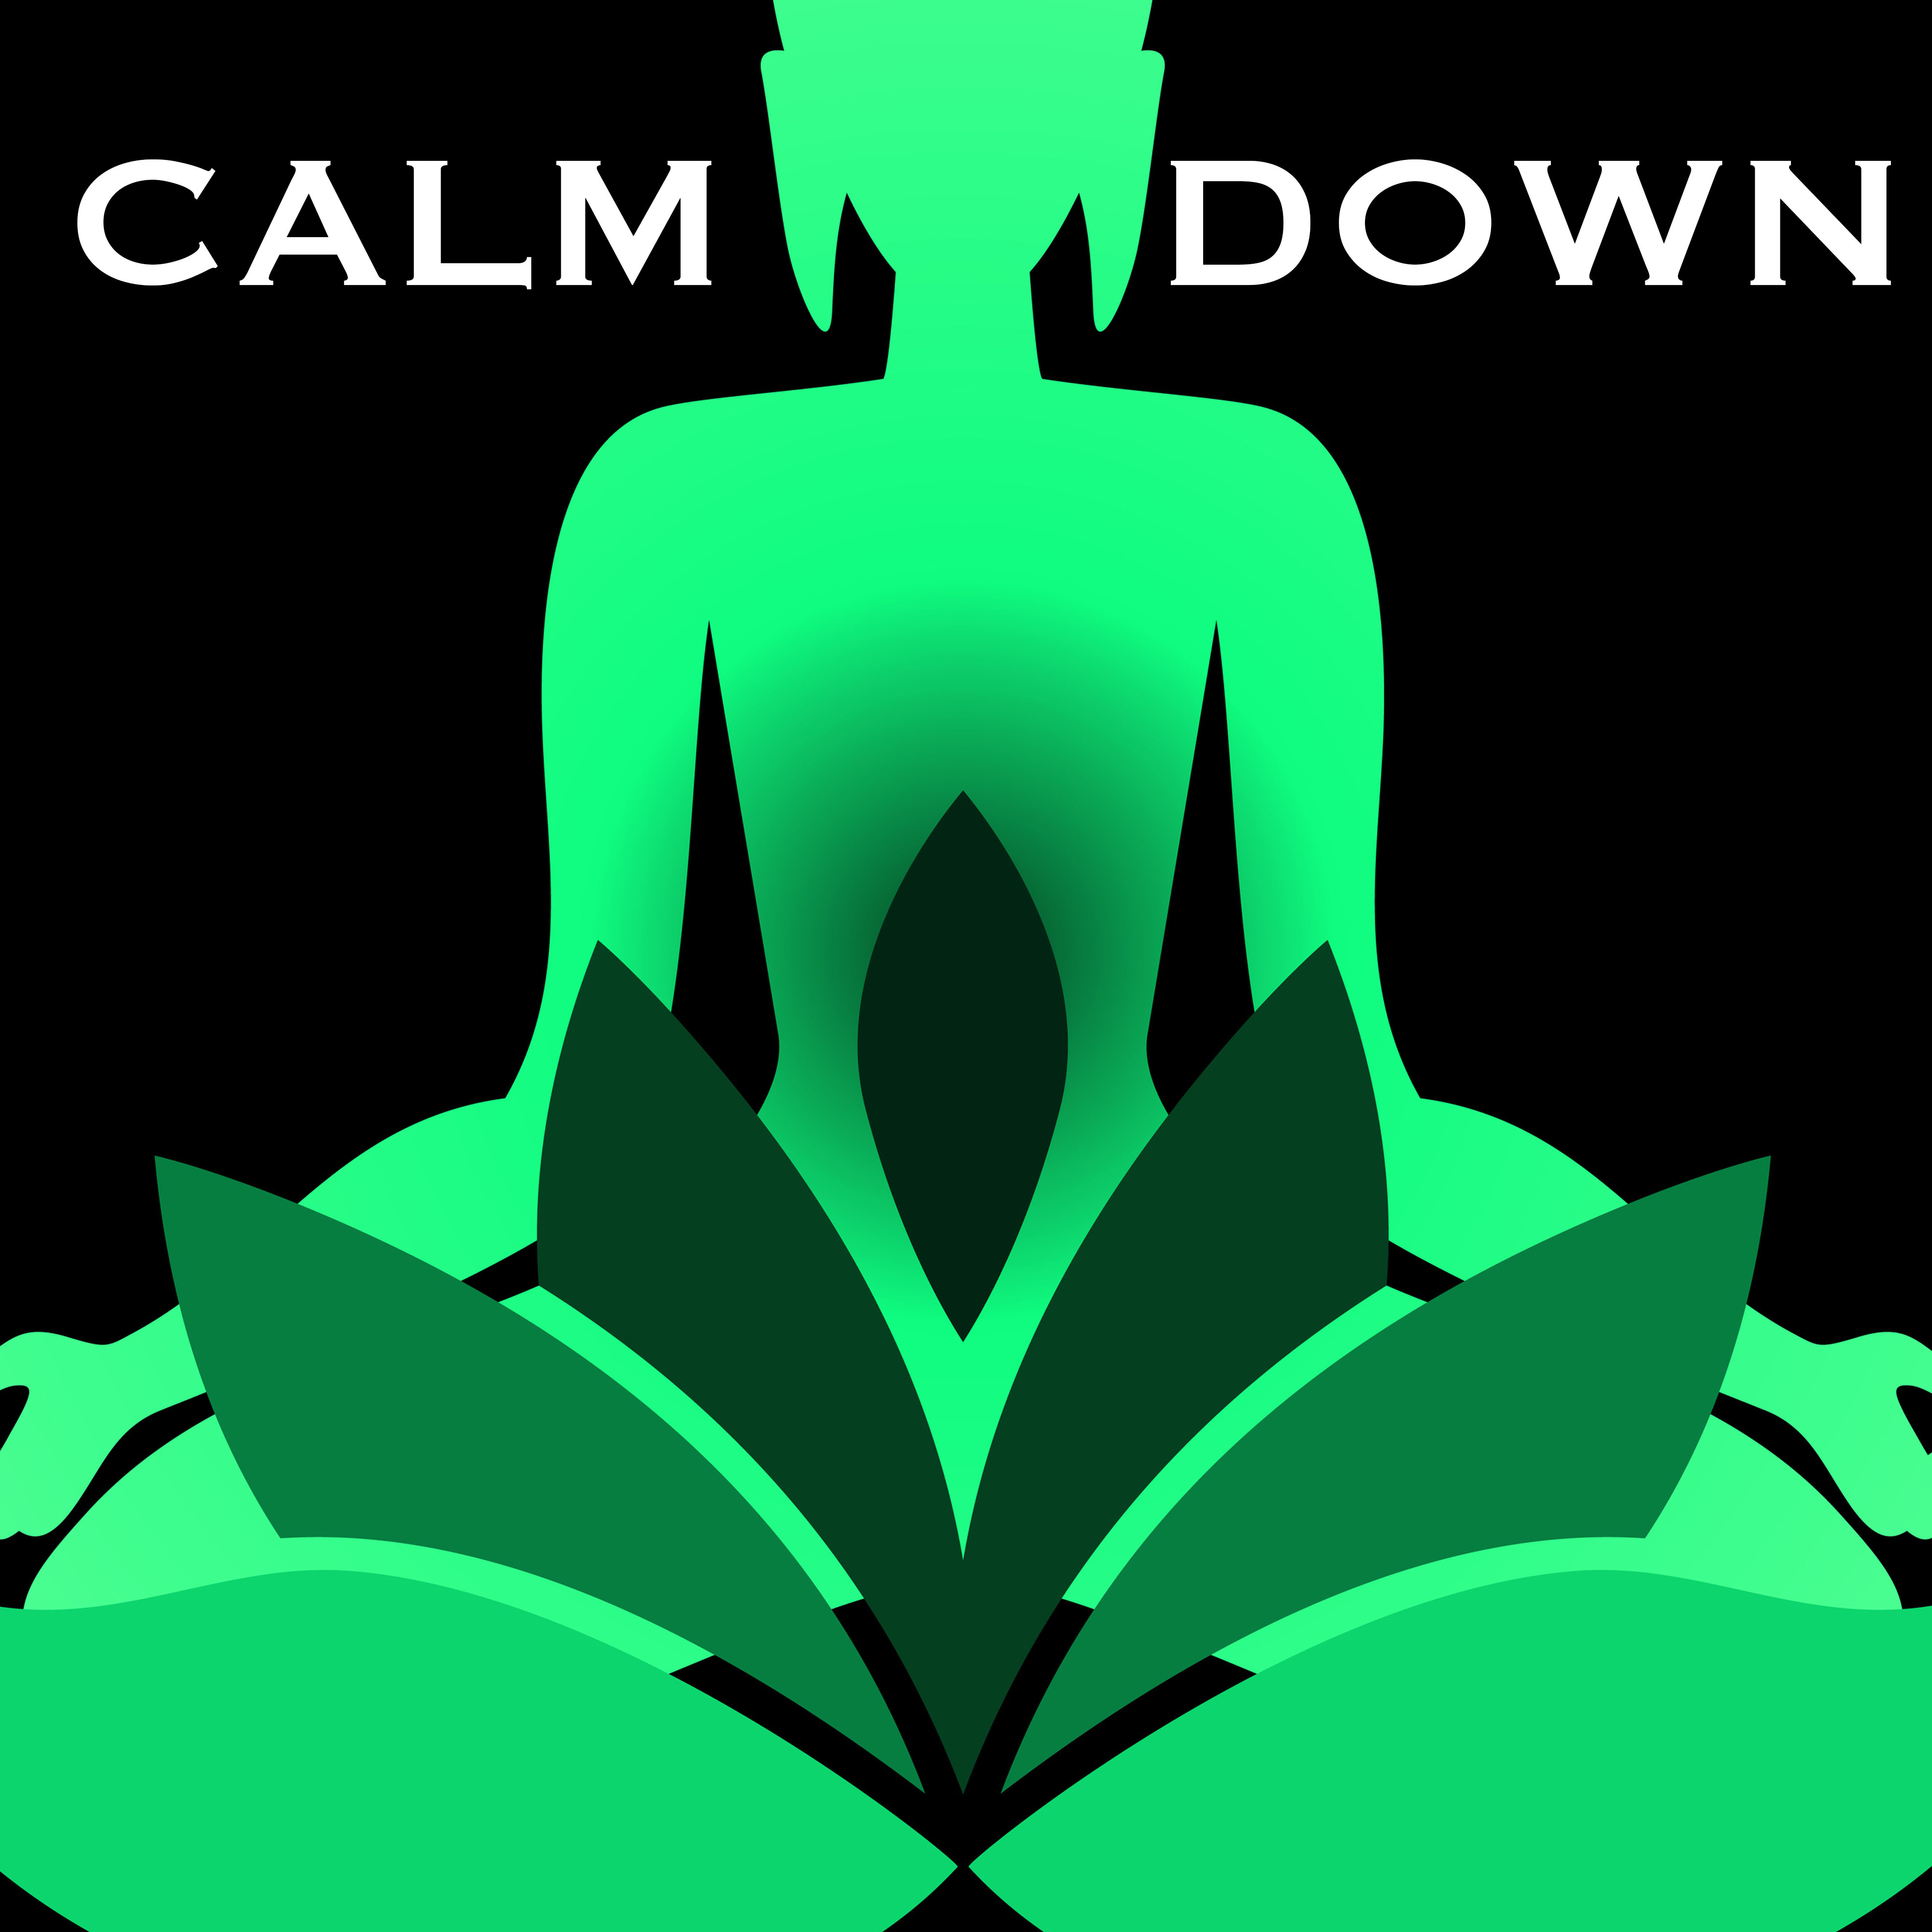 Calm Down - Music to Relax, Meditate Mindfully, Breathe Fully and Sleep Deeply